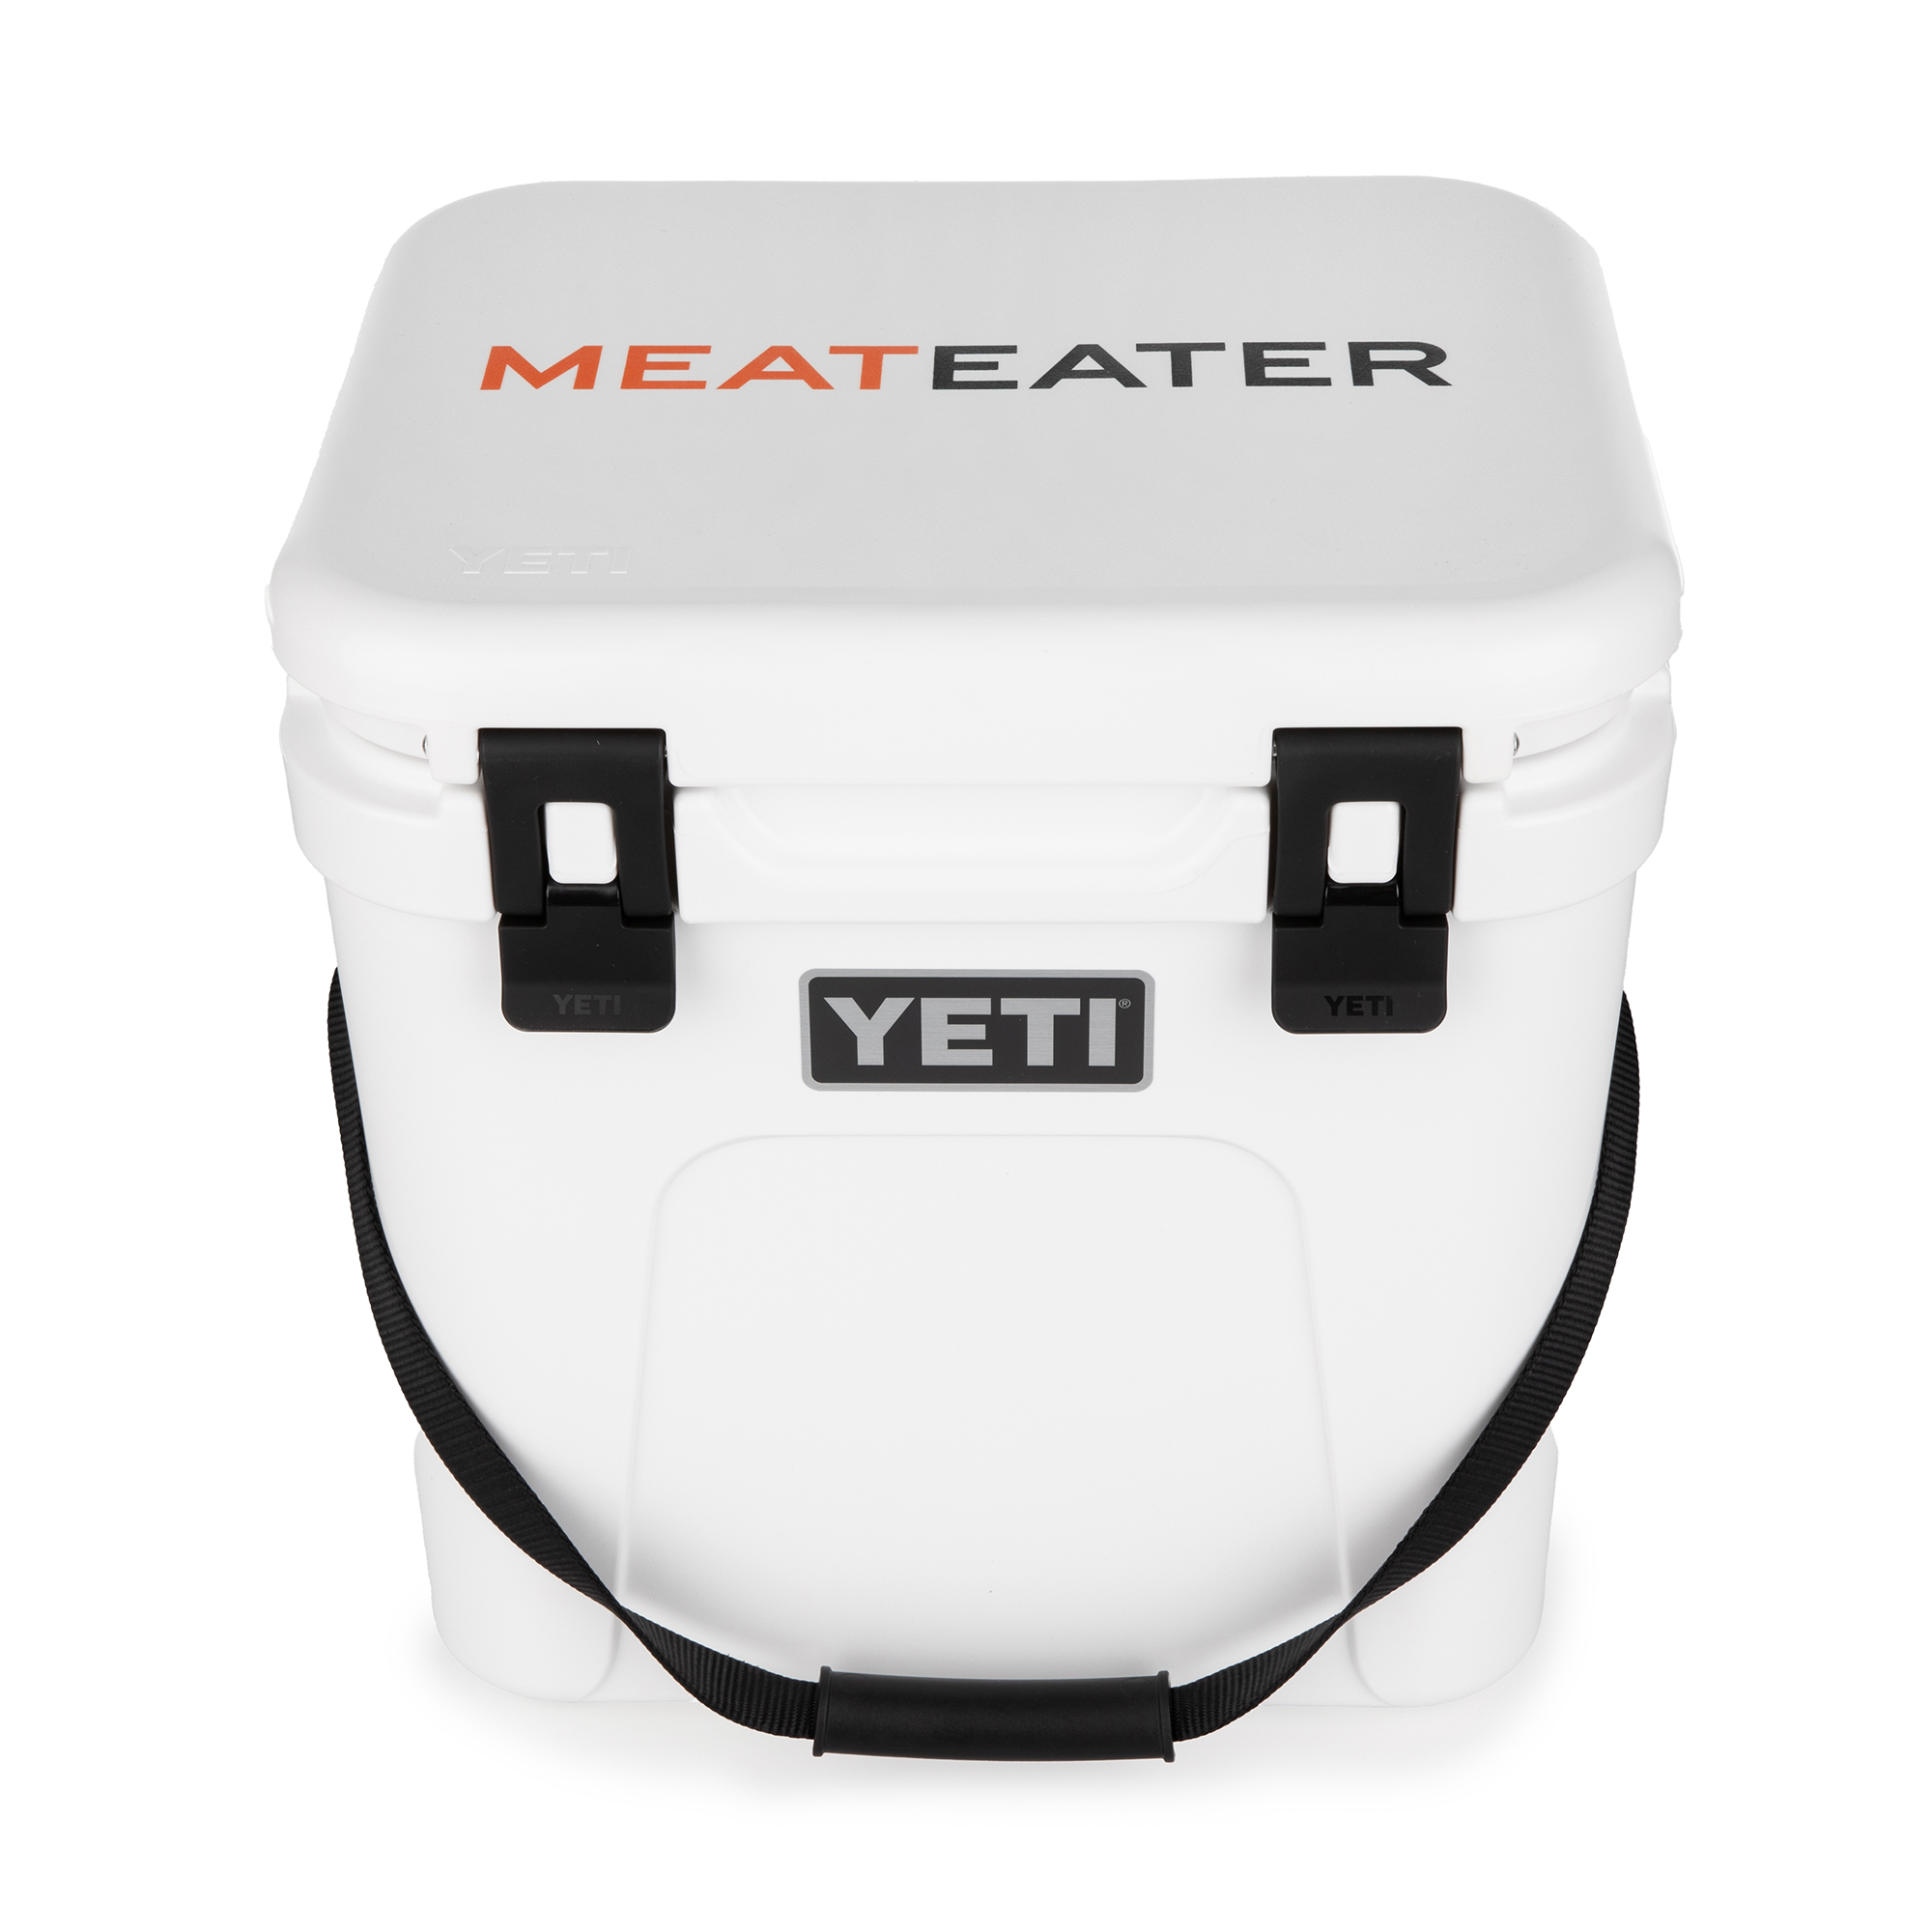 https://store.themeateater.com/on/demandware.static/-/Sites-meateater-master/default/dwf8f21234/meateater-branded-yeti-roadie-24/meateater-branded-yeti-roadie-24_color_white_1.jpg